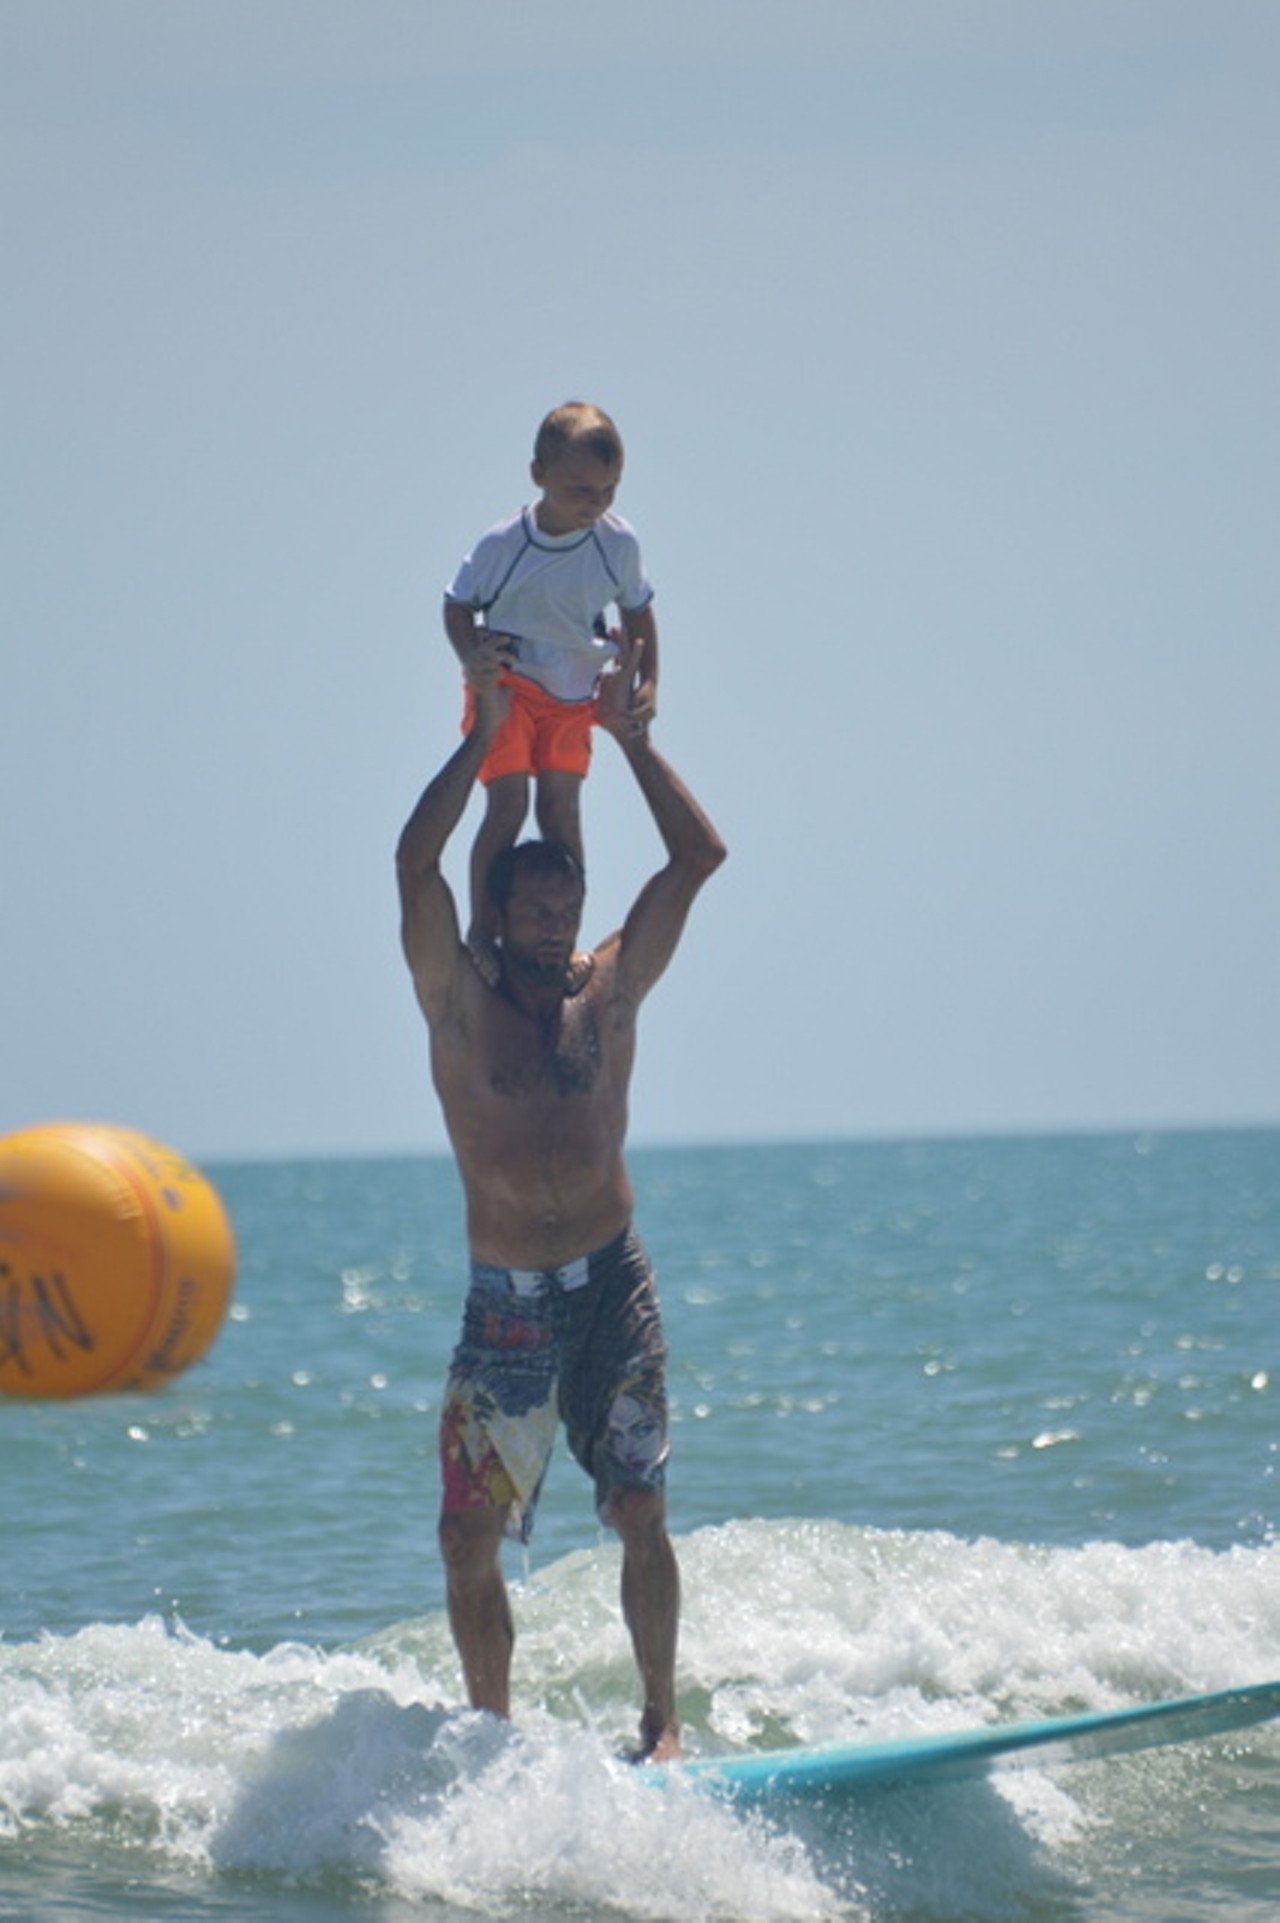 Finally, we&#146;ve got a fun gallery of surfing pics from this weekend&#146;s NKF Rich Salick Pro-Am Surf Fesitival in Cocoa Beach. Love this kid riding on dad&#146;s shoulders.